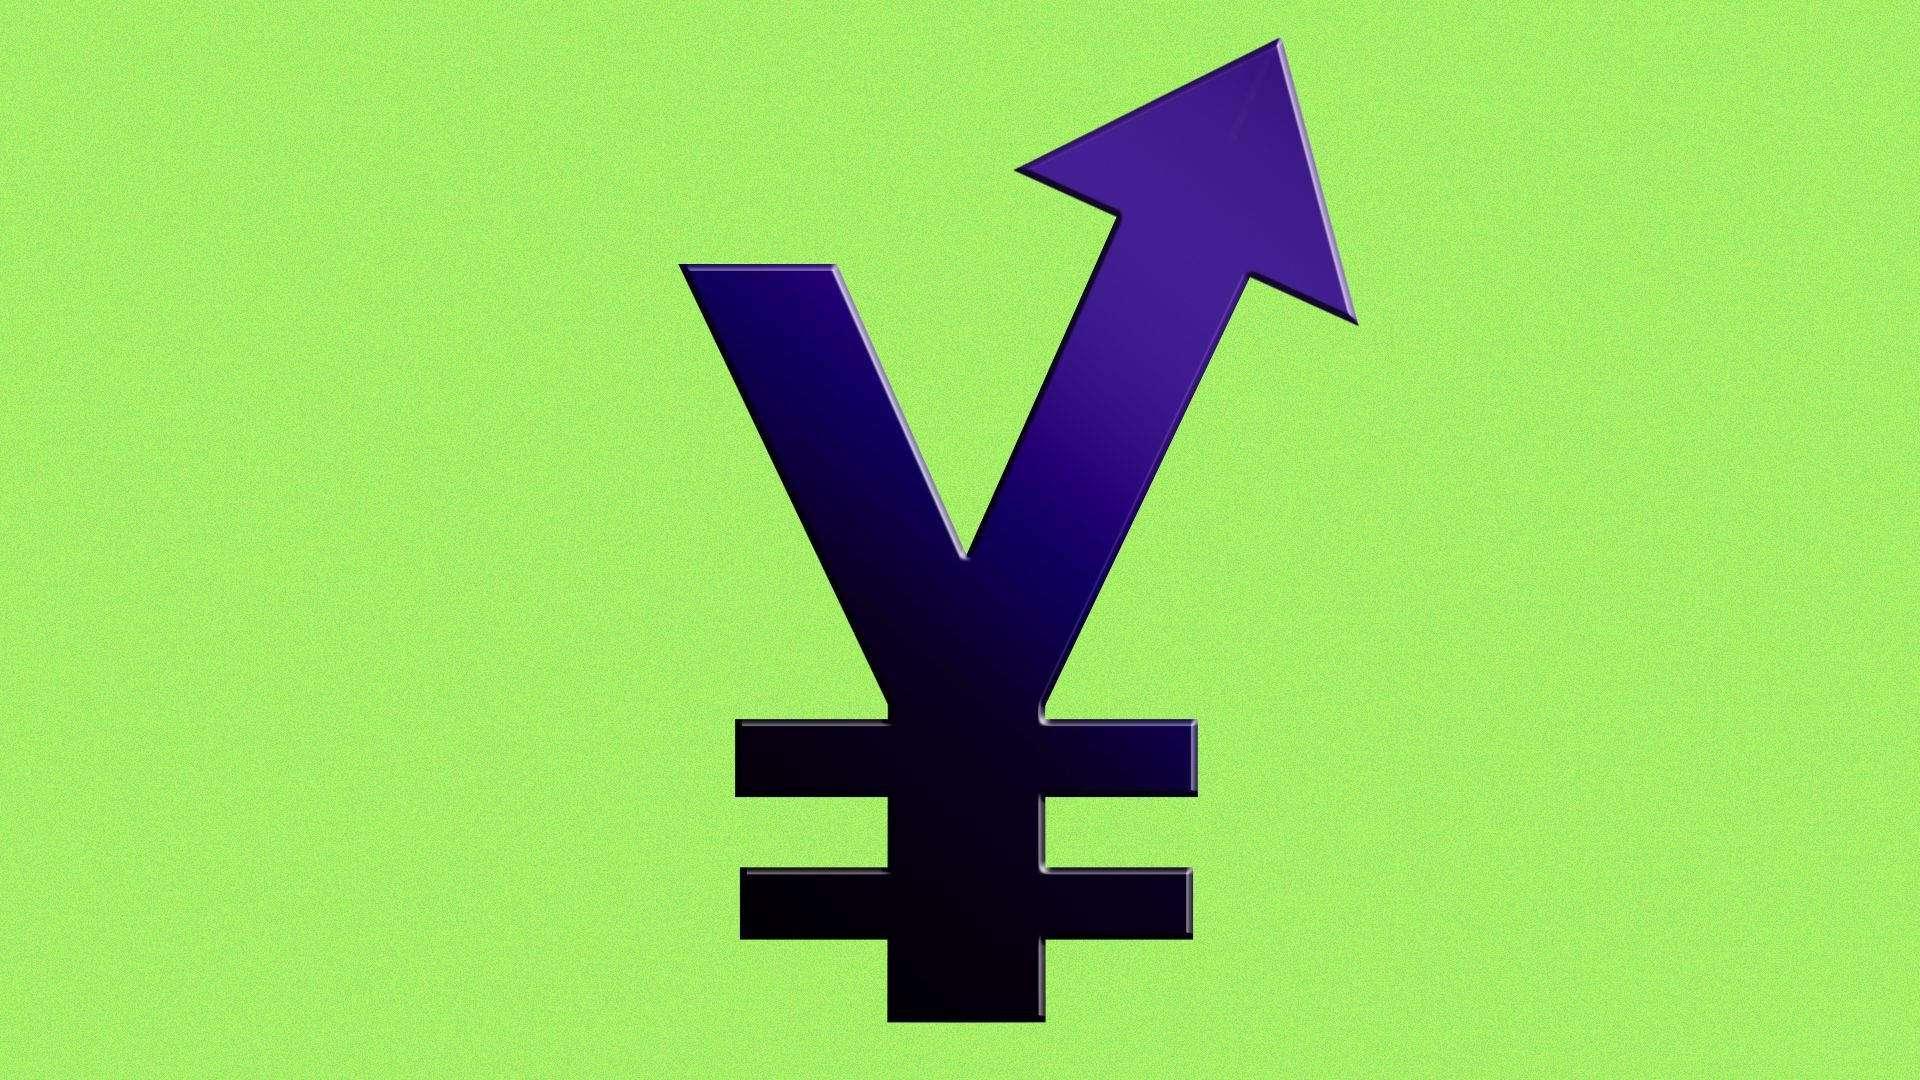 Illustration of the Yen symbol combined with an upward pointing arrow